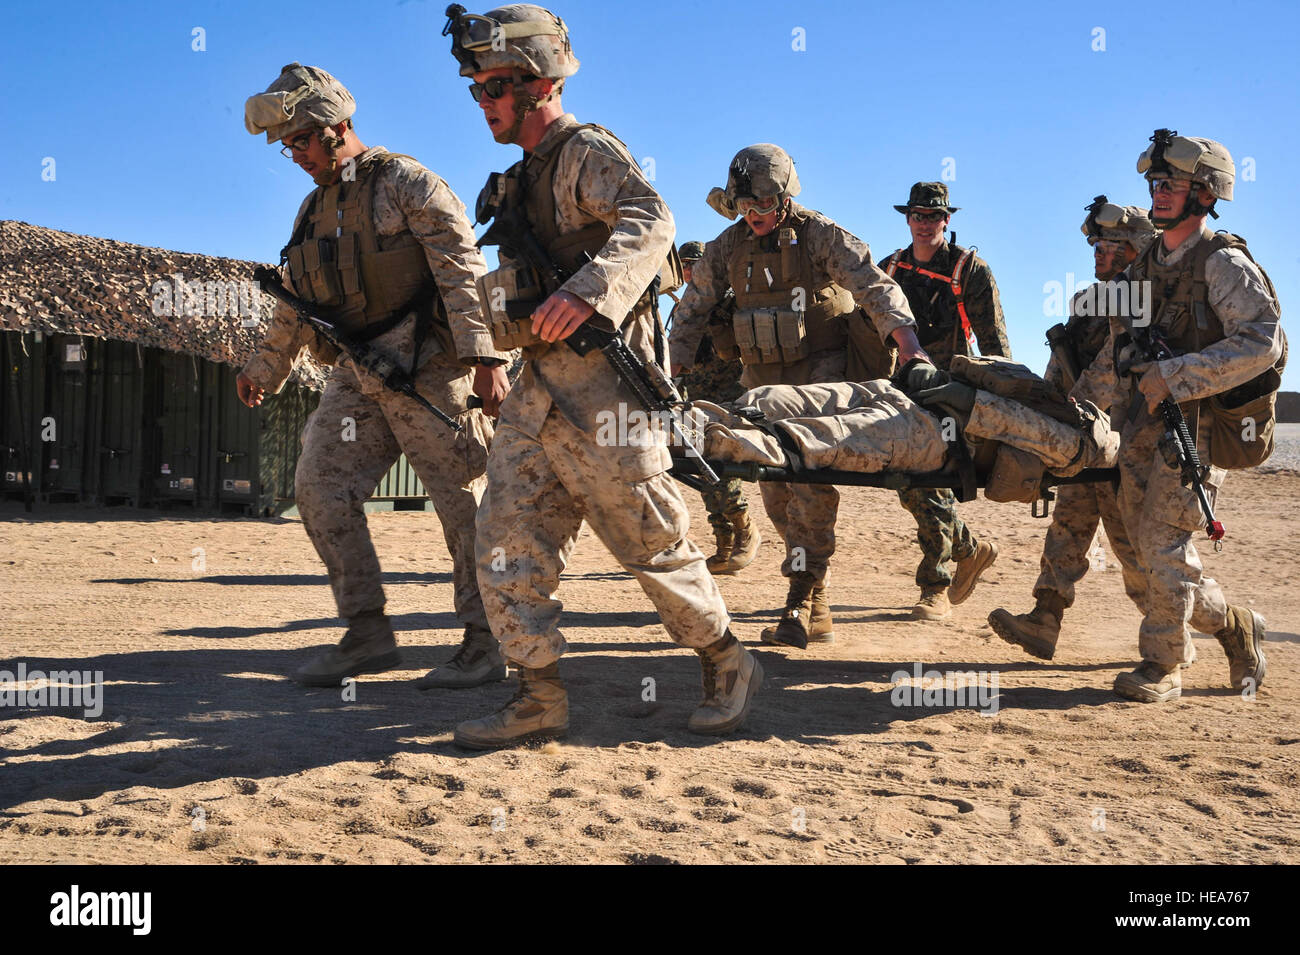 U.S. Marines transport a patient on a liter during Integrated Training Exercise 2-15 at Marine Corps Air Ground Combat Center Twentynine Palms (MCAGCC), Calif., Feb. 11, 2015. MCAGCC conducts relevant live-fire combined arms training, urban operations, and joint/coalition level integration training that promotes operational forces' readiness.  Tech. Sgt. Joselito Aribuabo Stock Photo